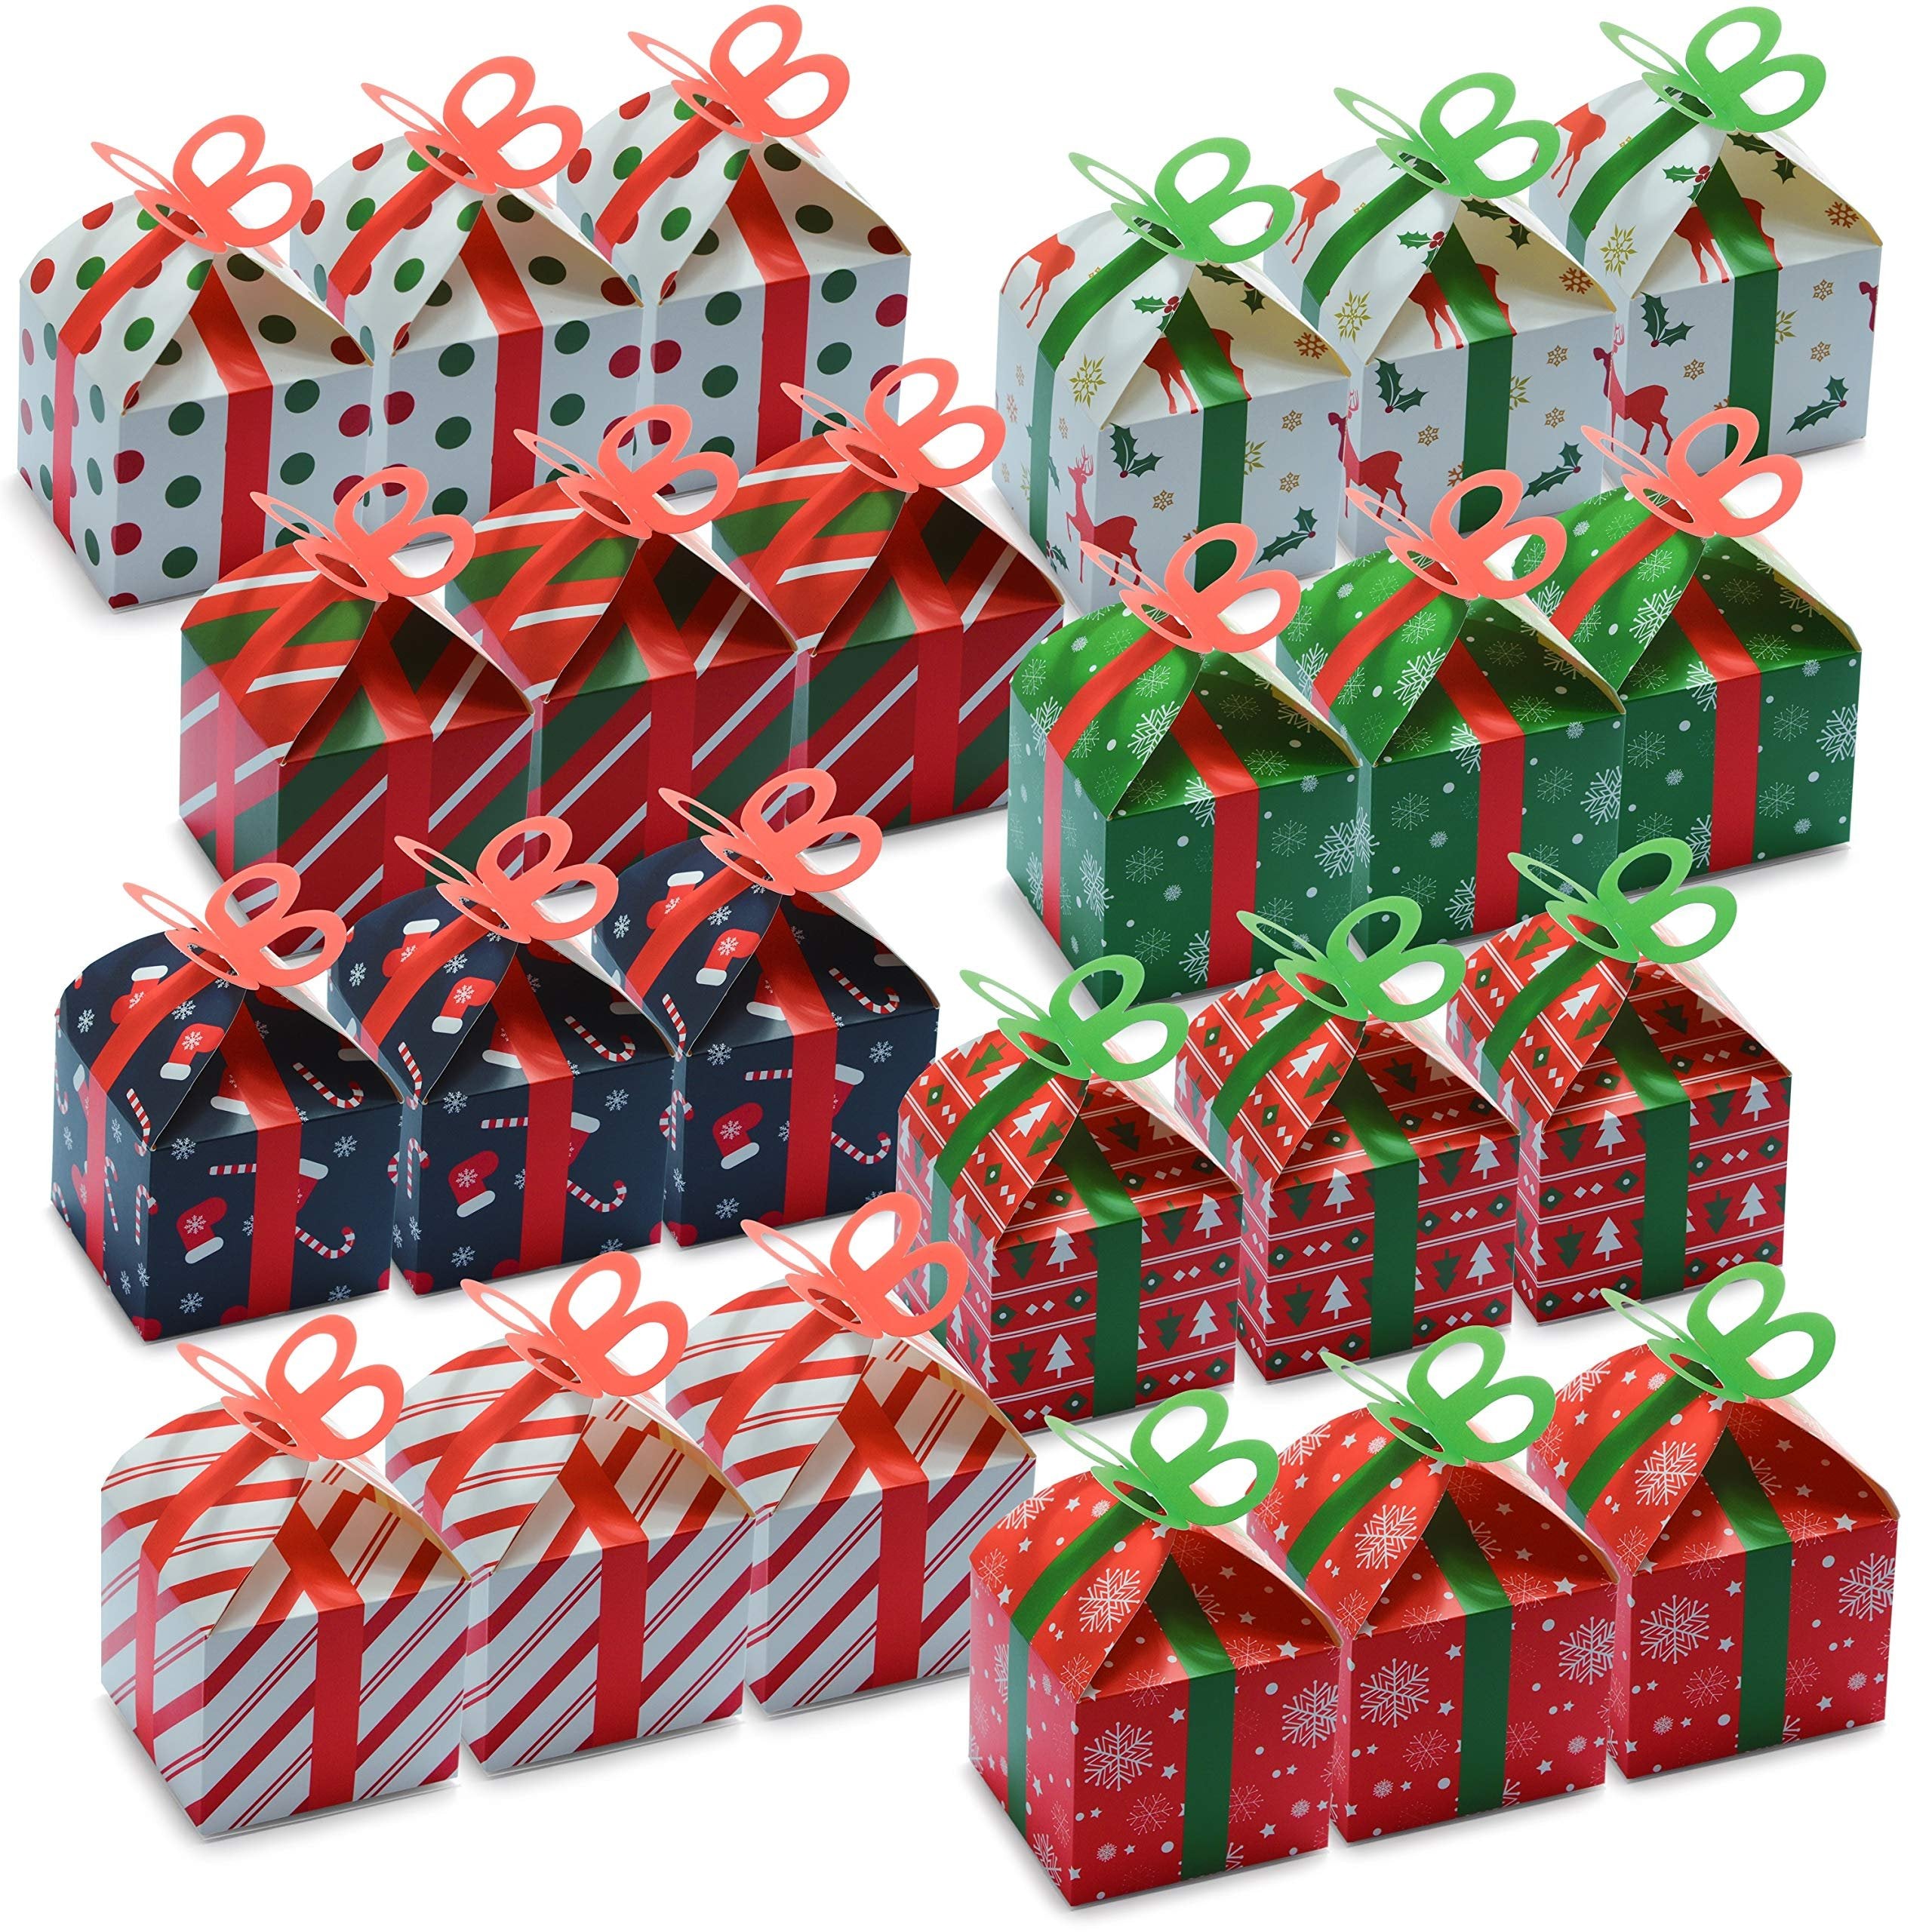 Prextex 24 Assorted 3D Christmas Gift Boxes - Multicolor, Great for Treats, Candy, Cupcakes, and More